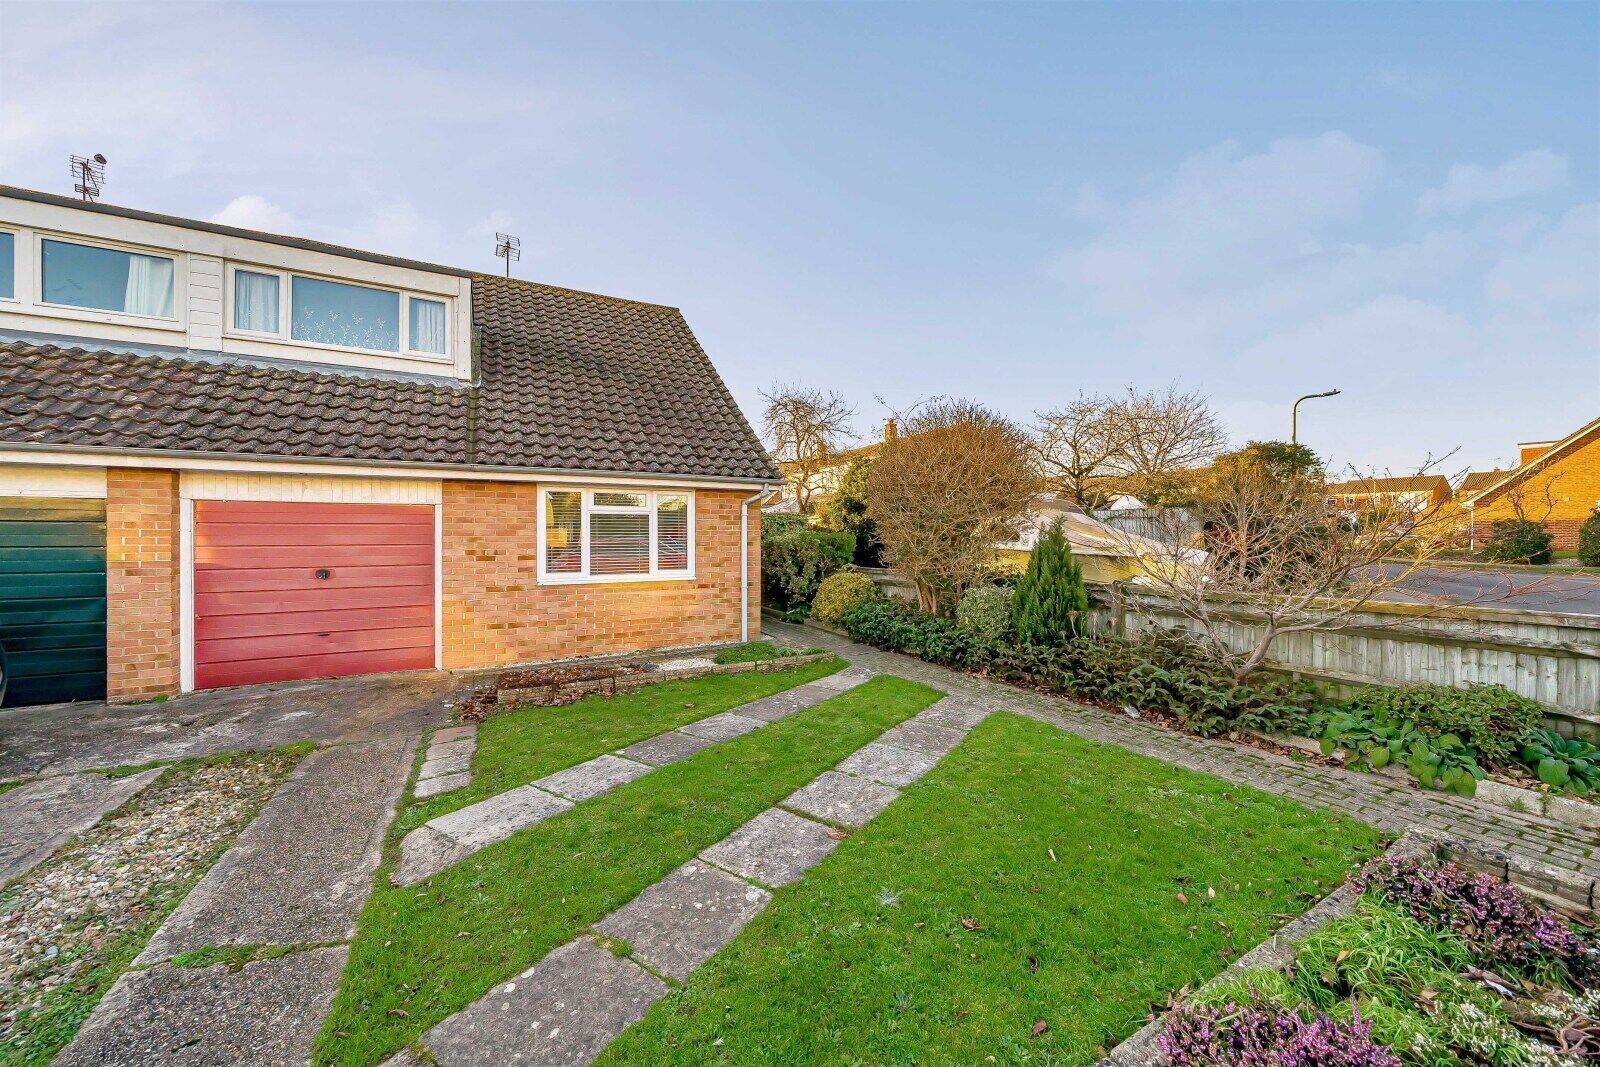 3 bedroom semi detached house for sale Wheatfields Road, Shinfield, RG2, main image